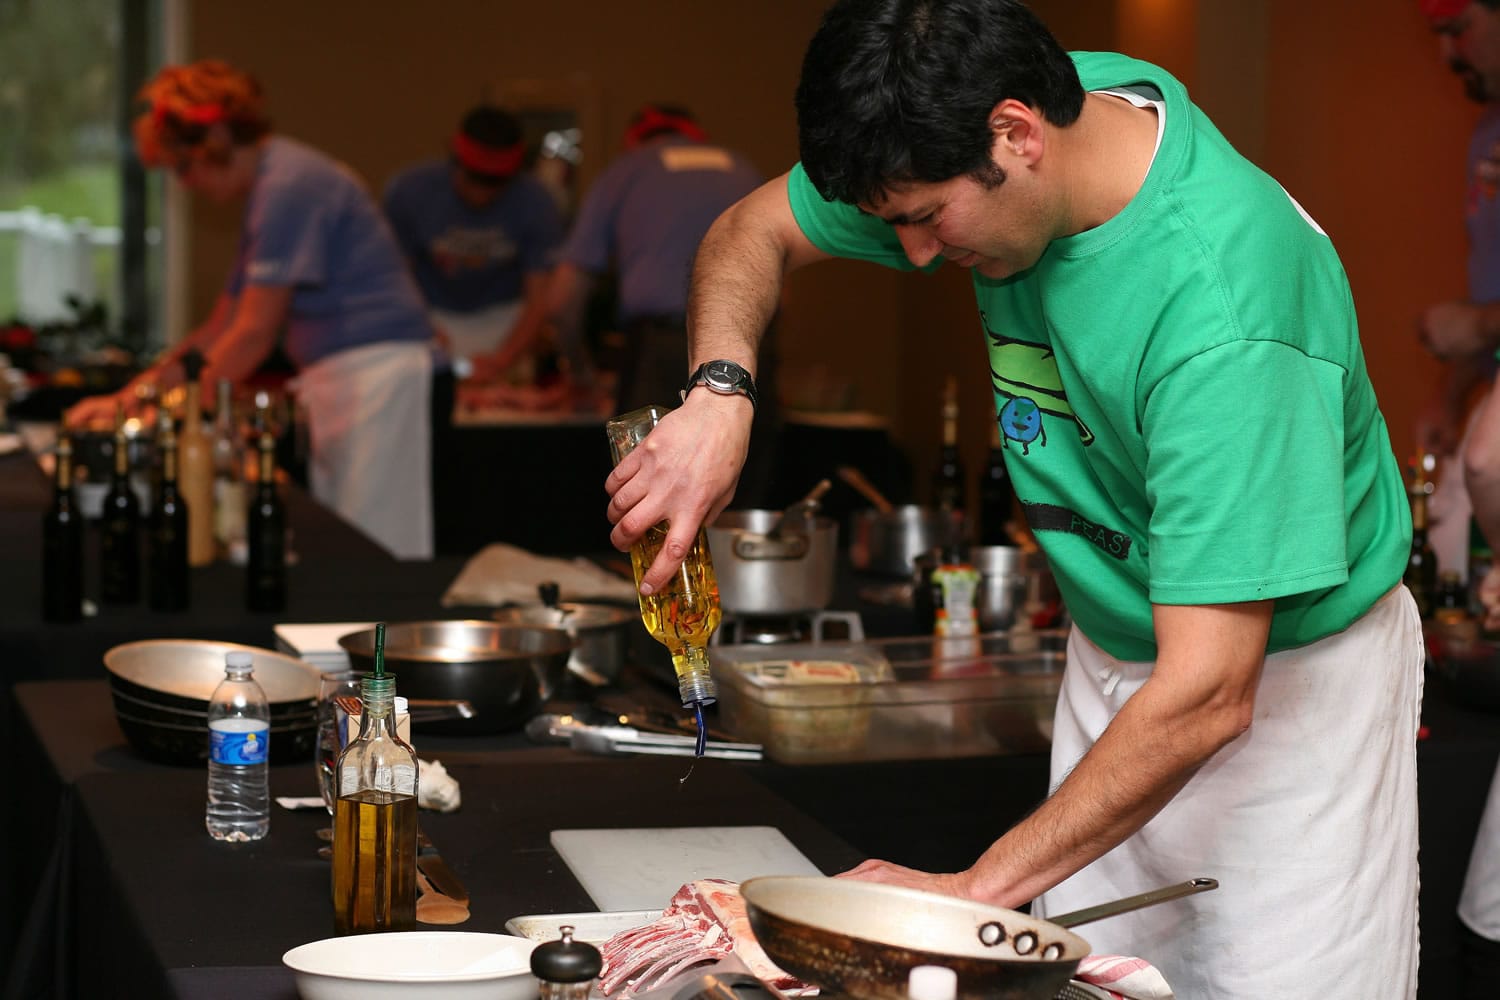 Peter Echevario, reigning Camas Iron Chef for the past two years, is back to defend his title in this year's cooking competition, which raises money for local schools.